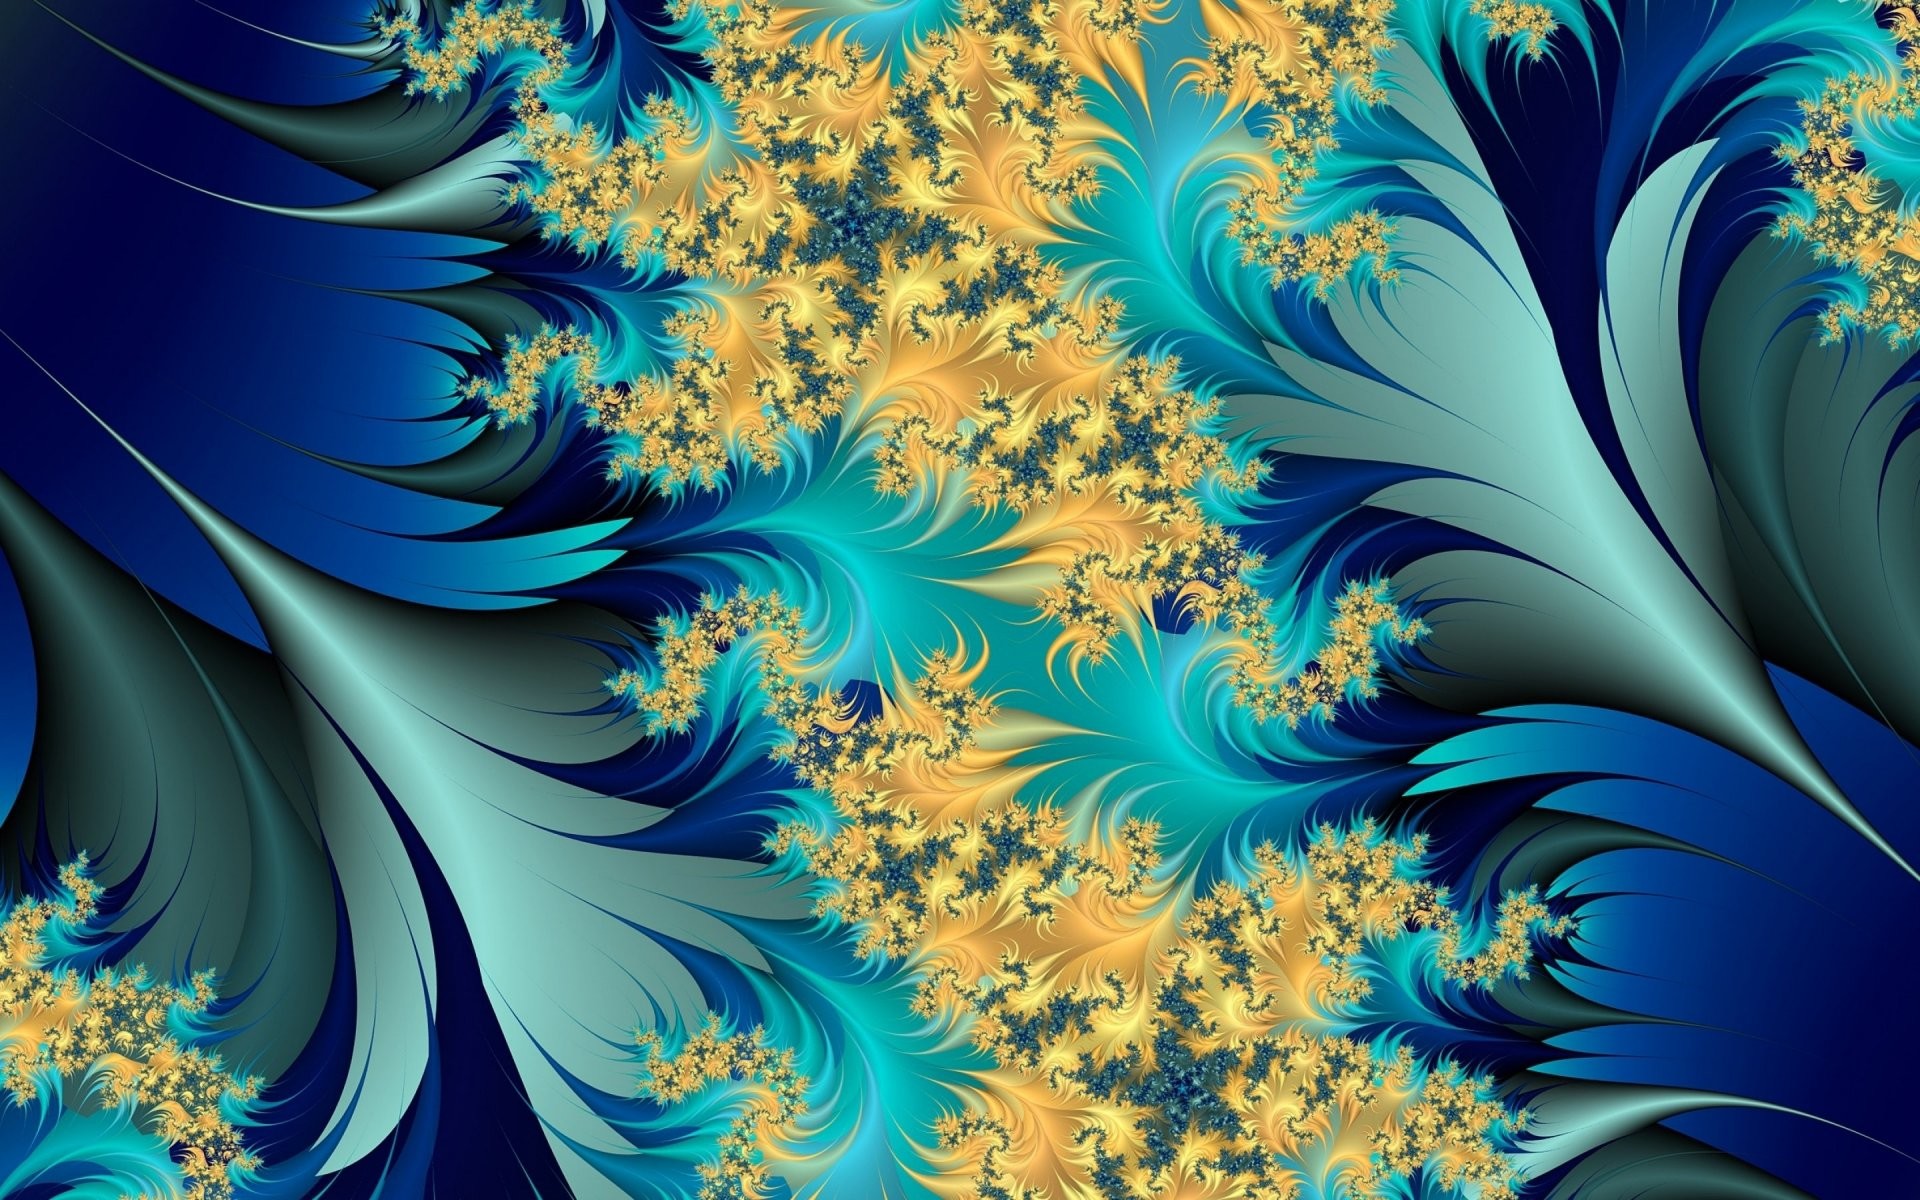 Yellow & Blue Leaves Fractal wallpapers and stock photos